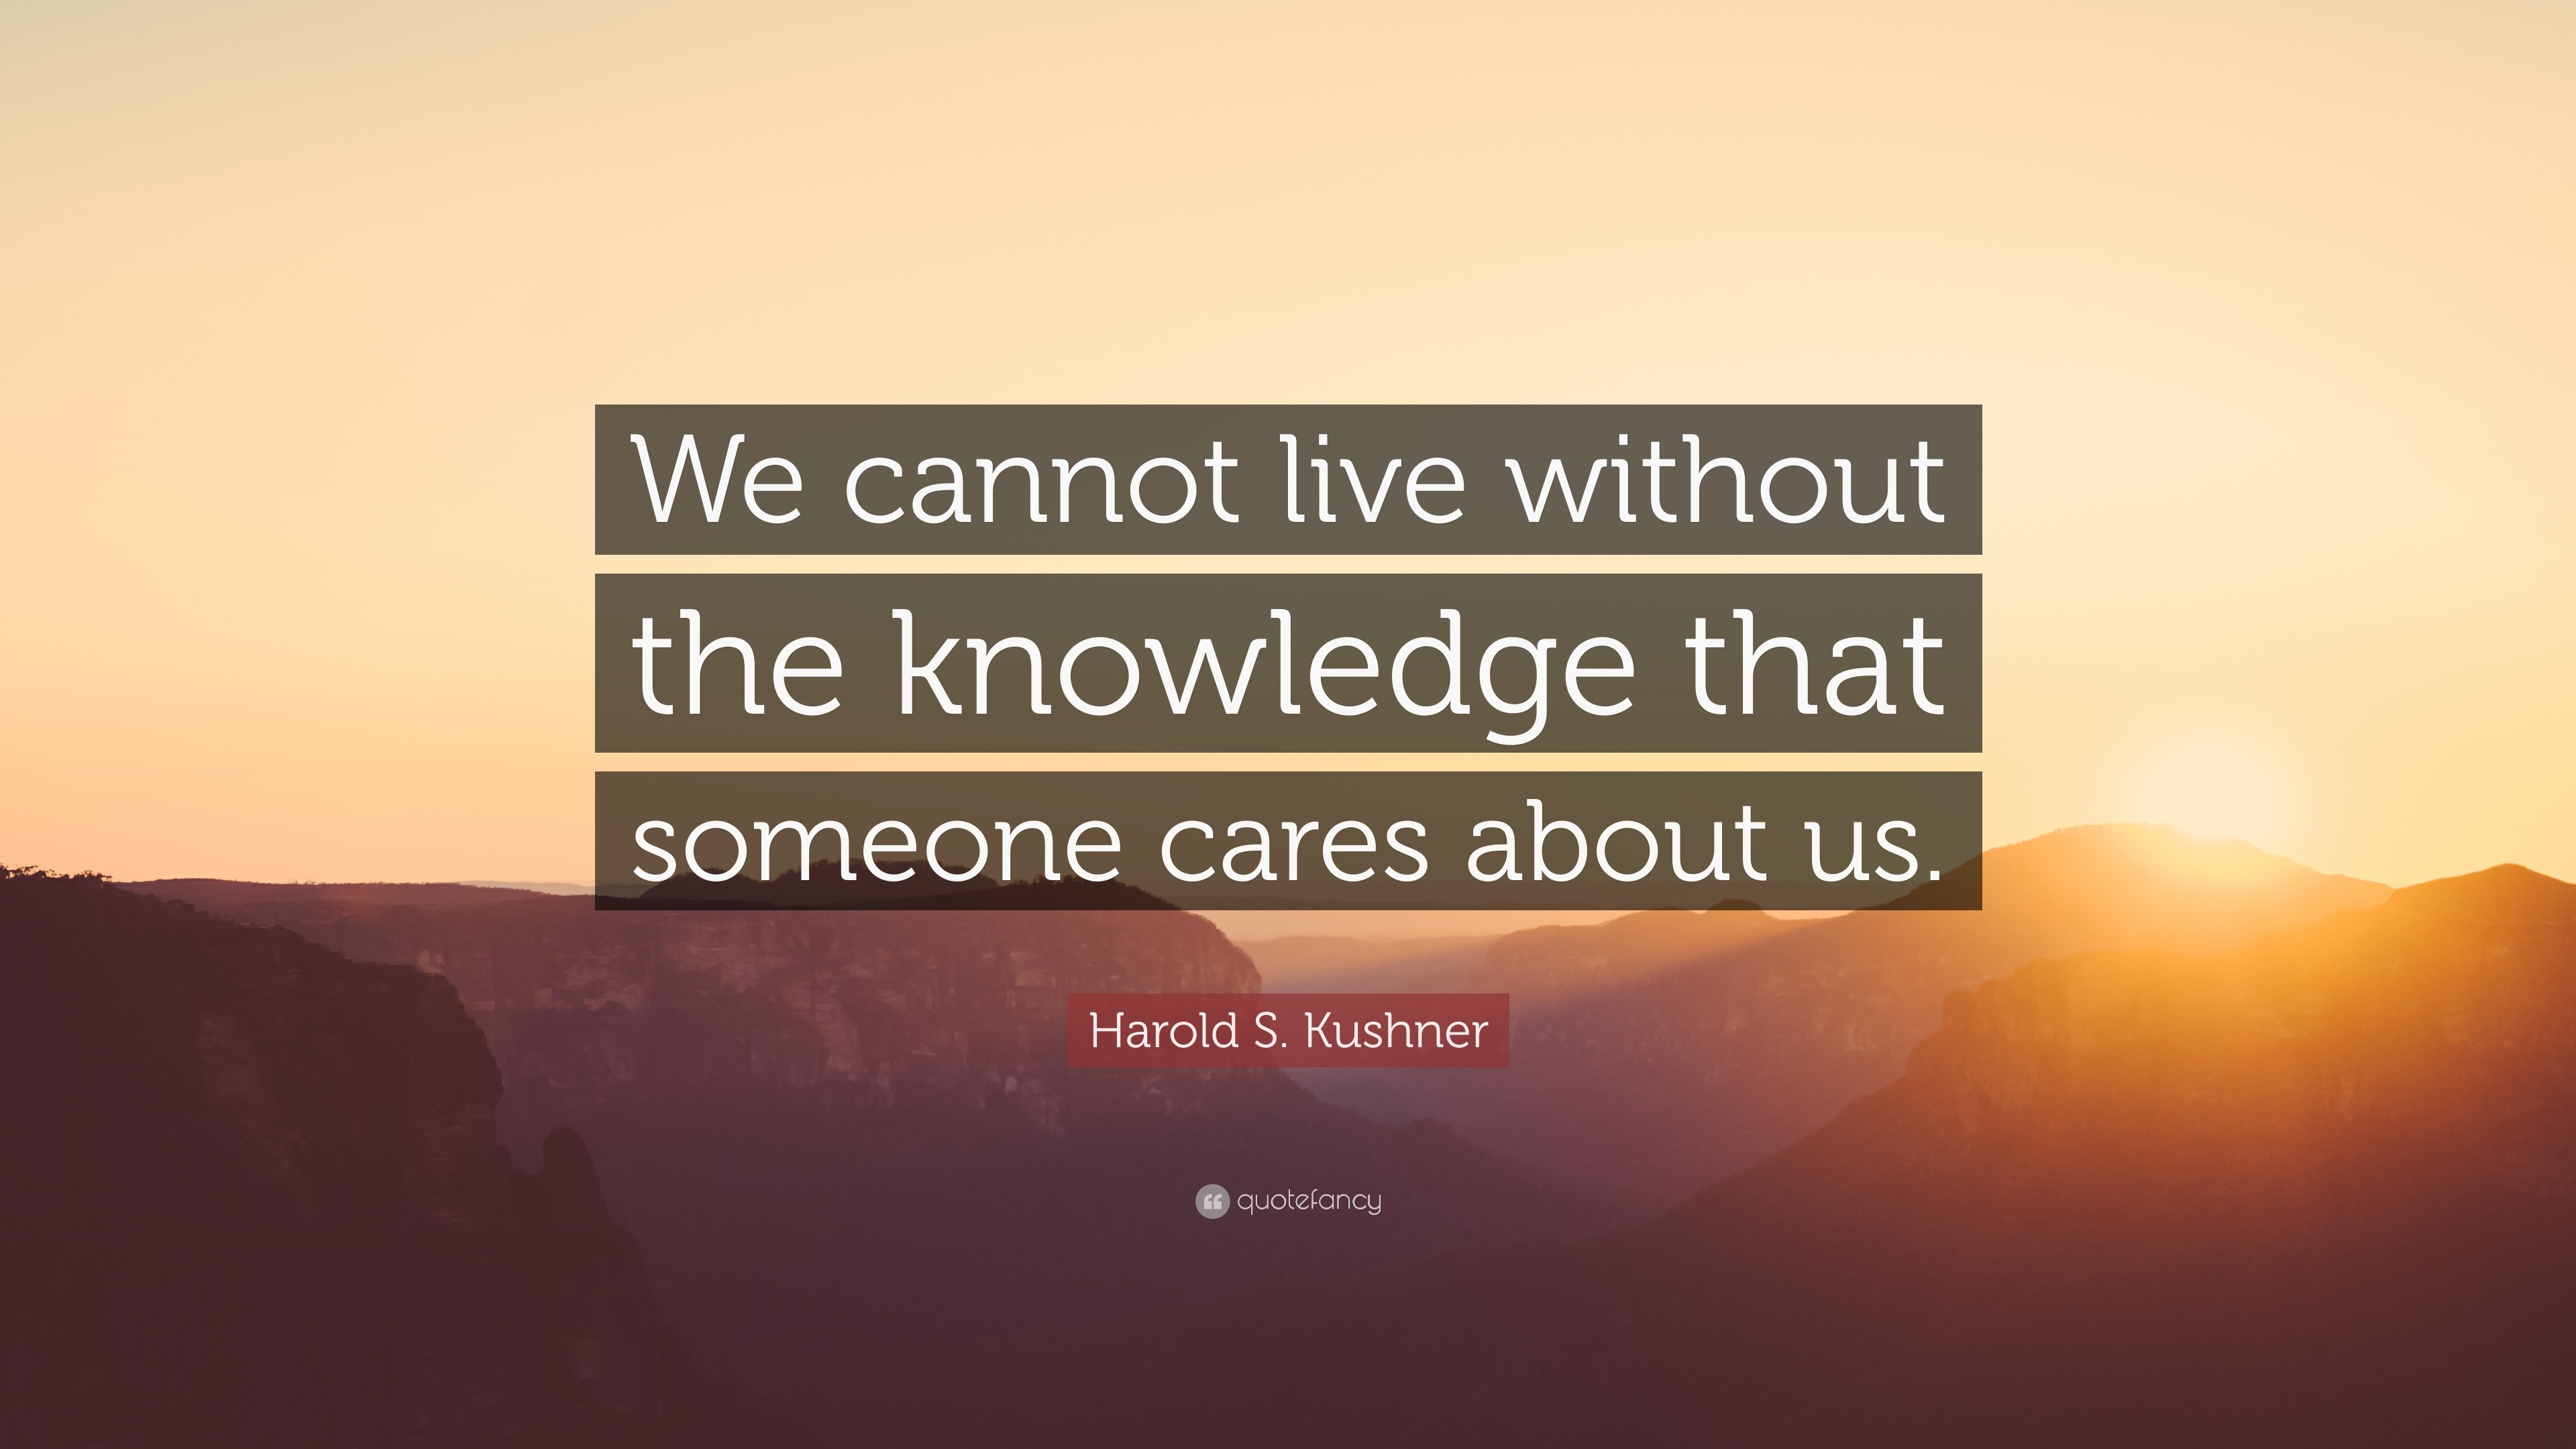 Harold S Kushner Quote “we Cannot Live Without The Knowledge That Someone Cares About Us”